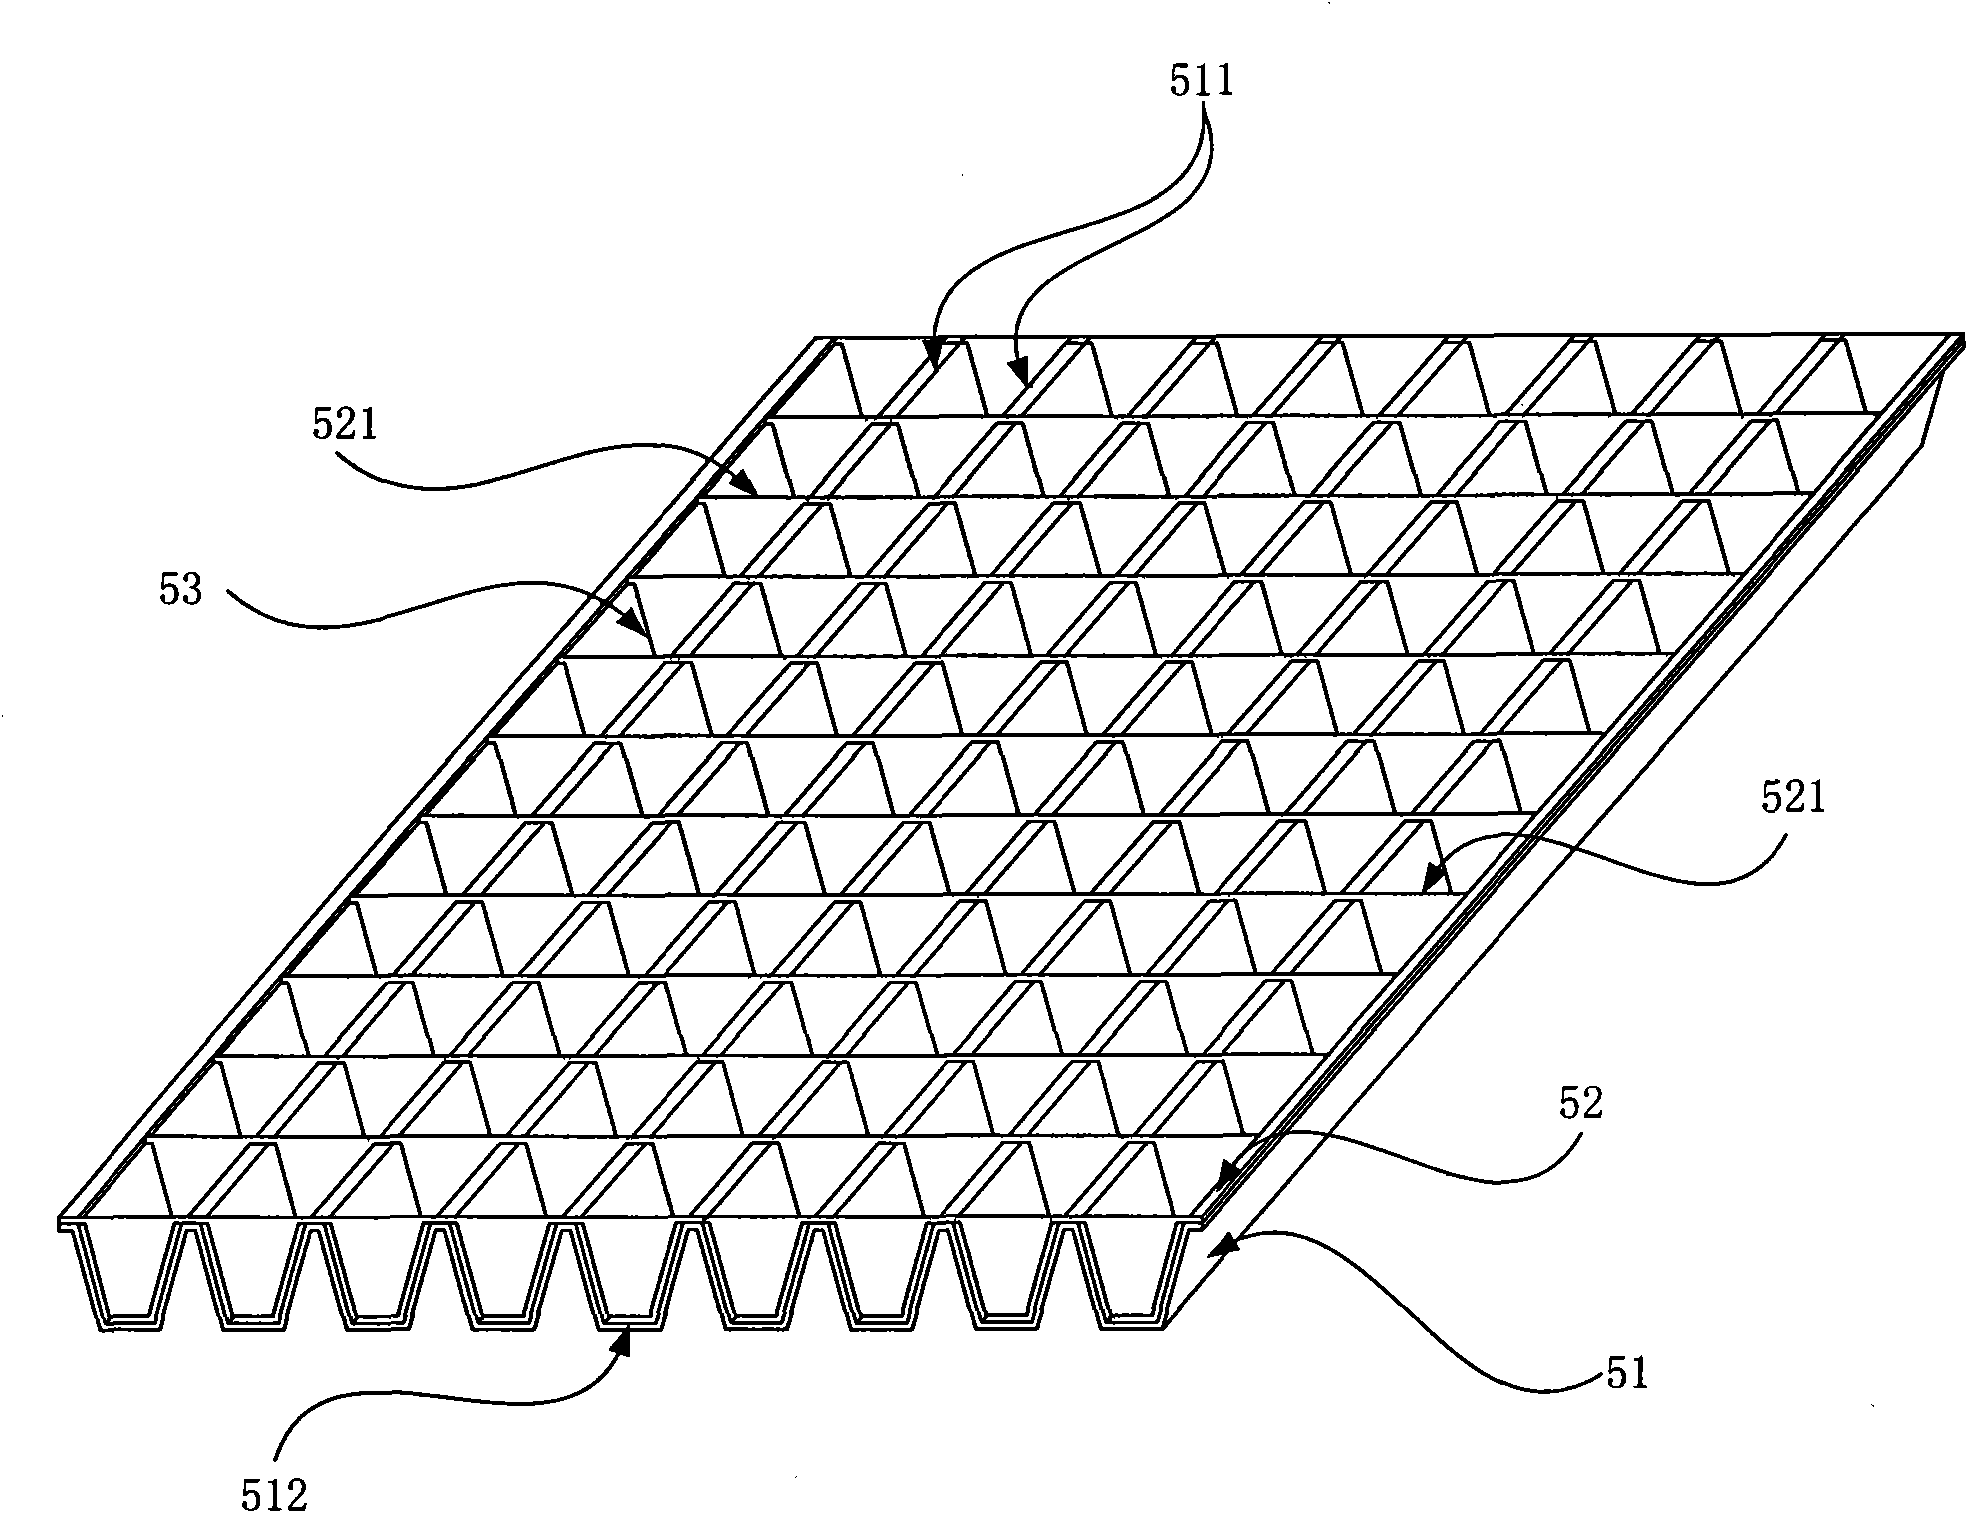 Automatic vegetable cultivation and processing method